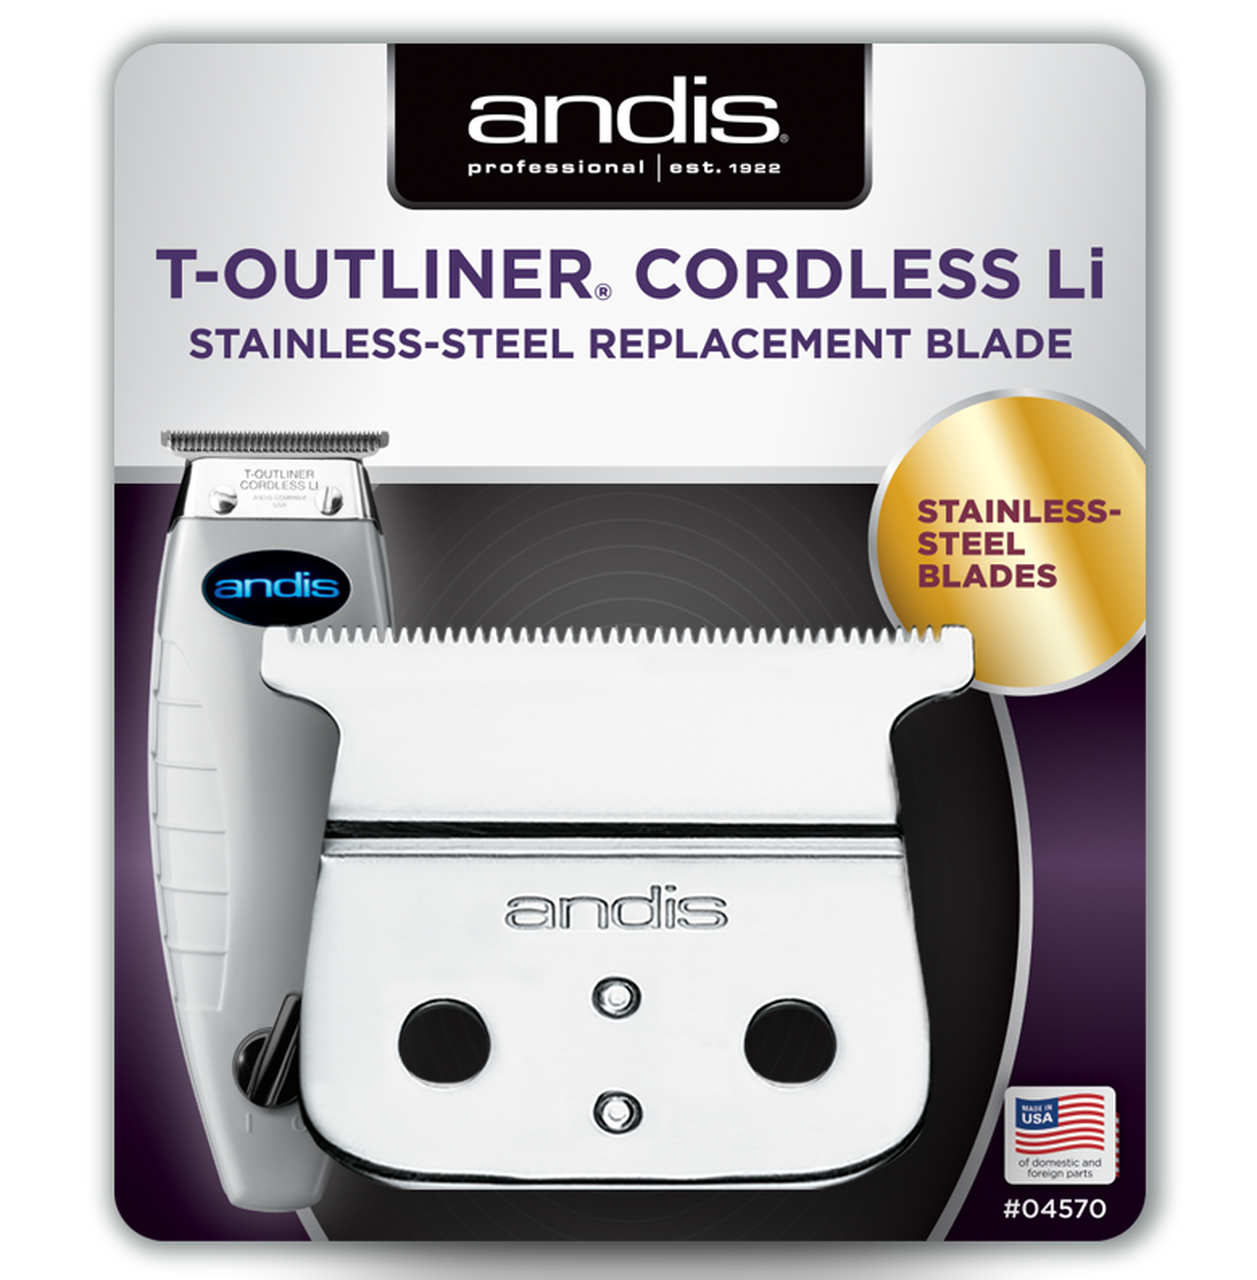 Andis Professional T-Outliner Cordless Li Stainless Steel Replacement Blade